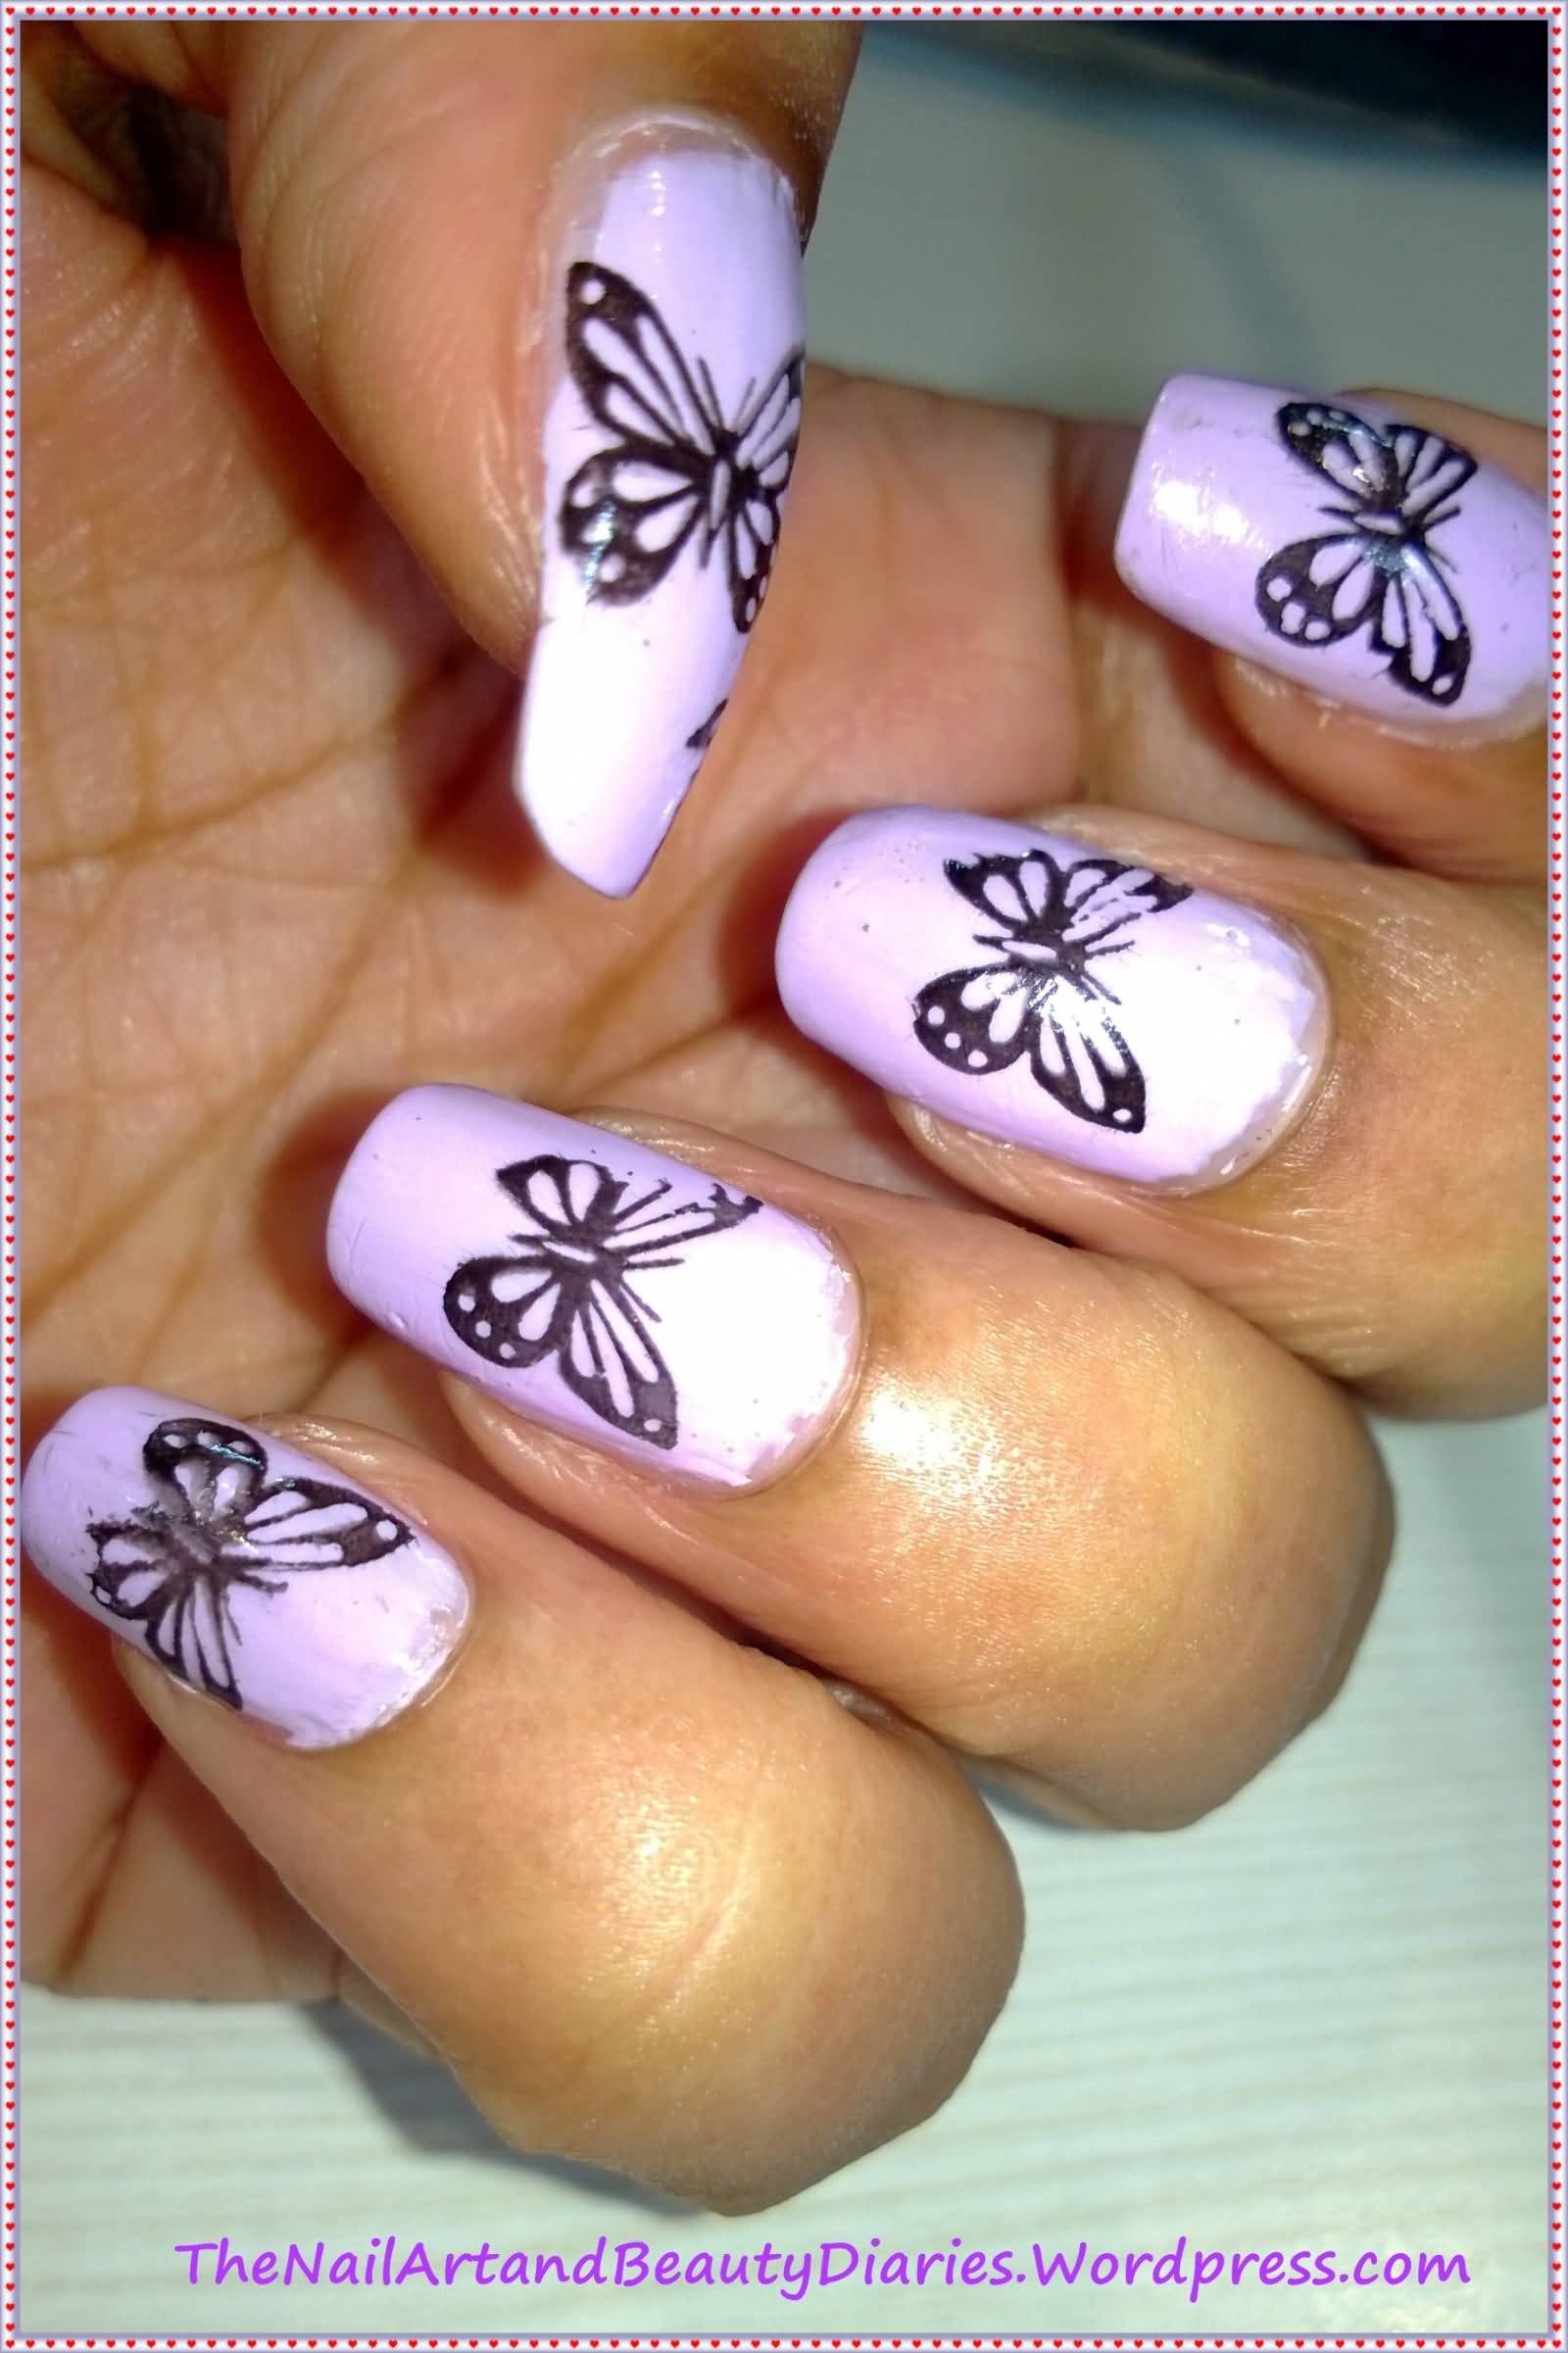 Pink Nails With Black Butterflies Nail Art